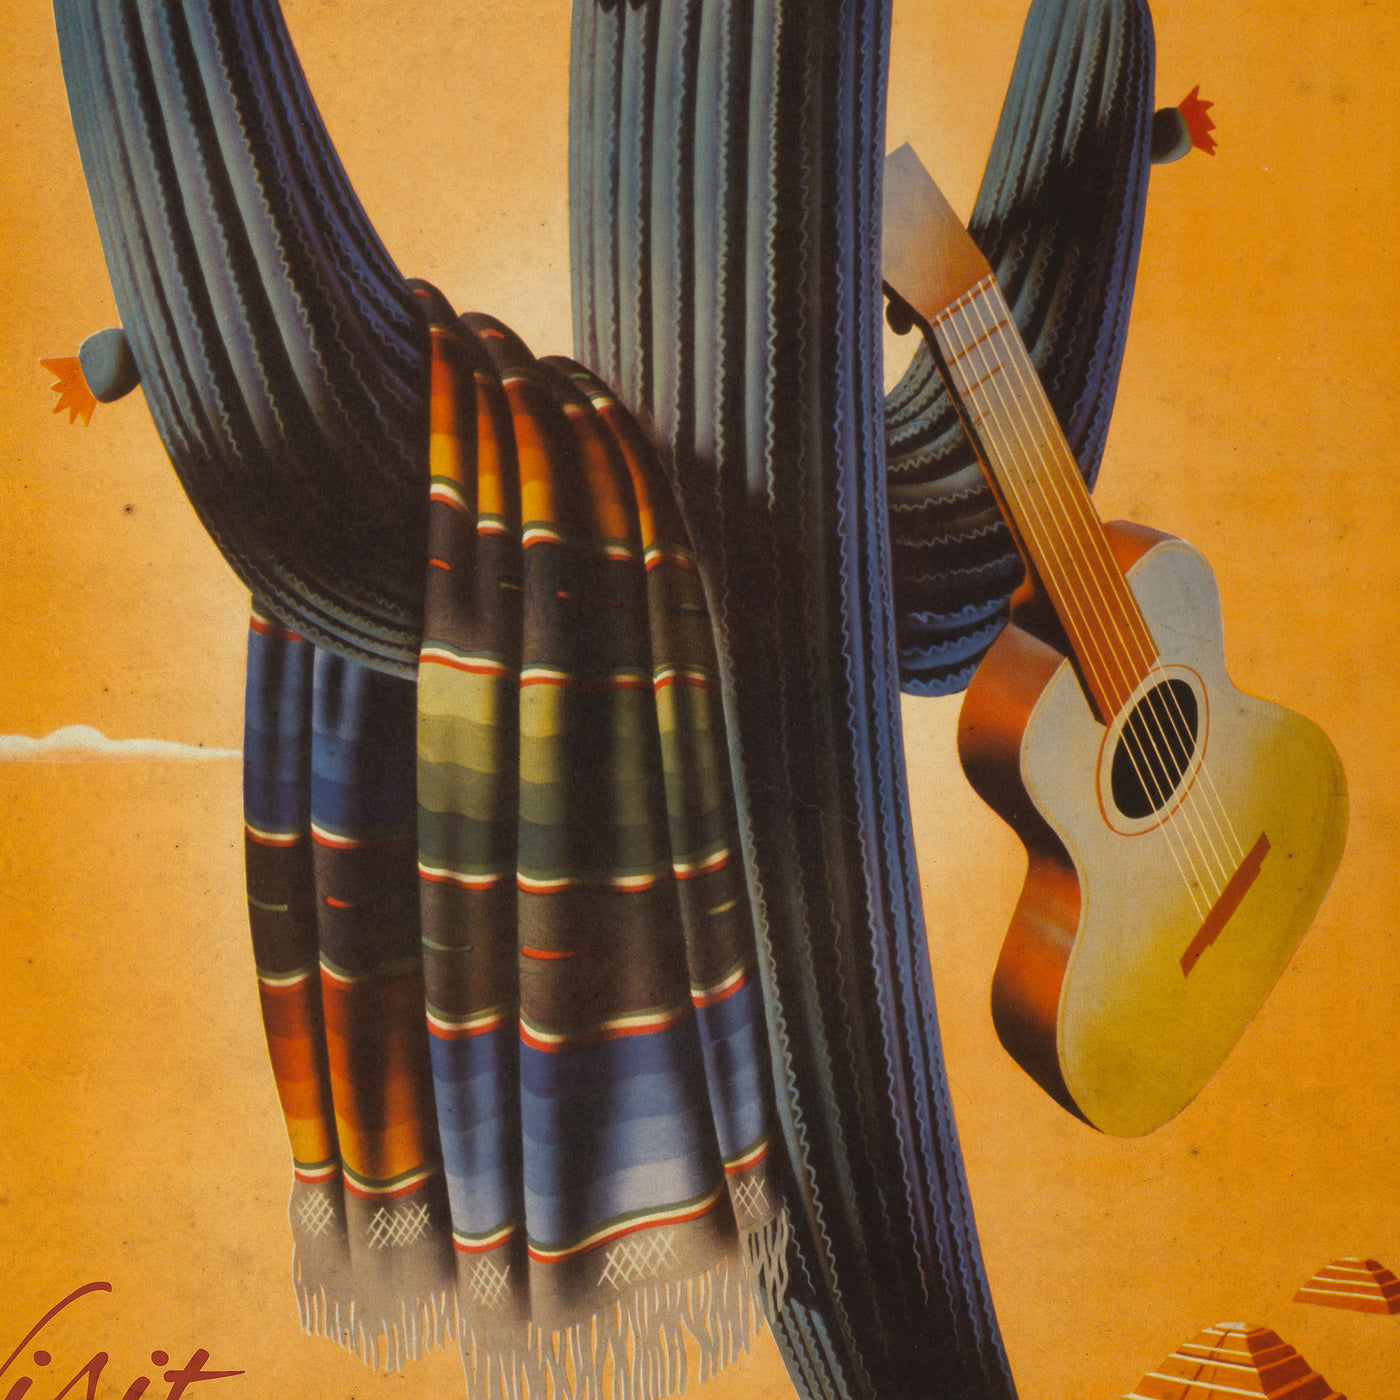 Mexico vintage travel poster wall art. 